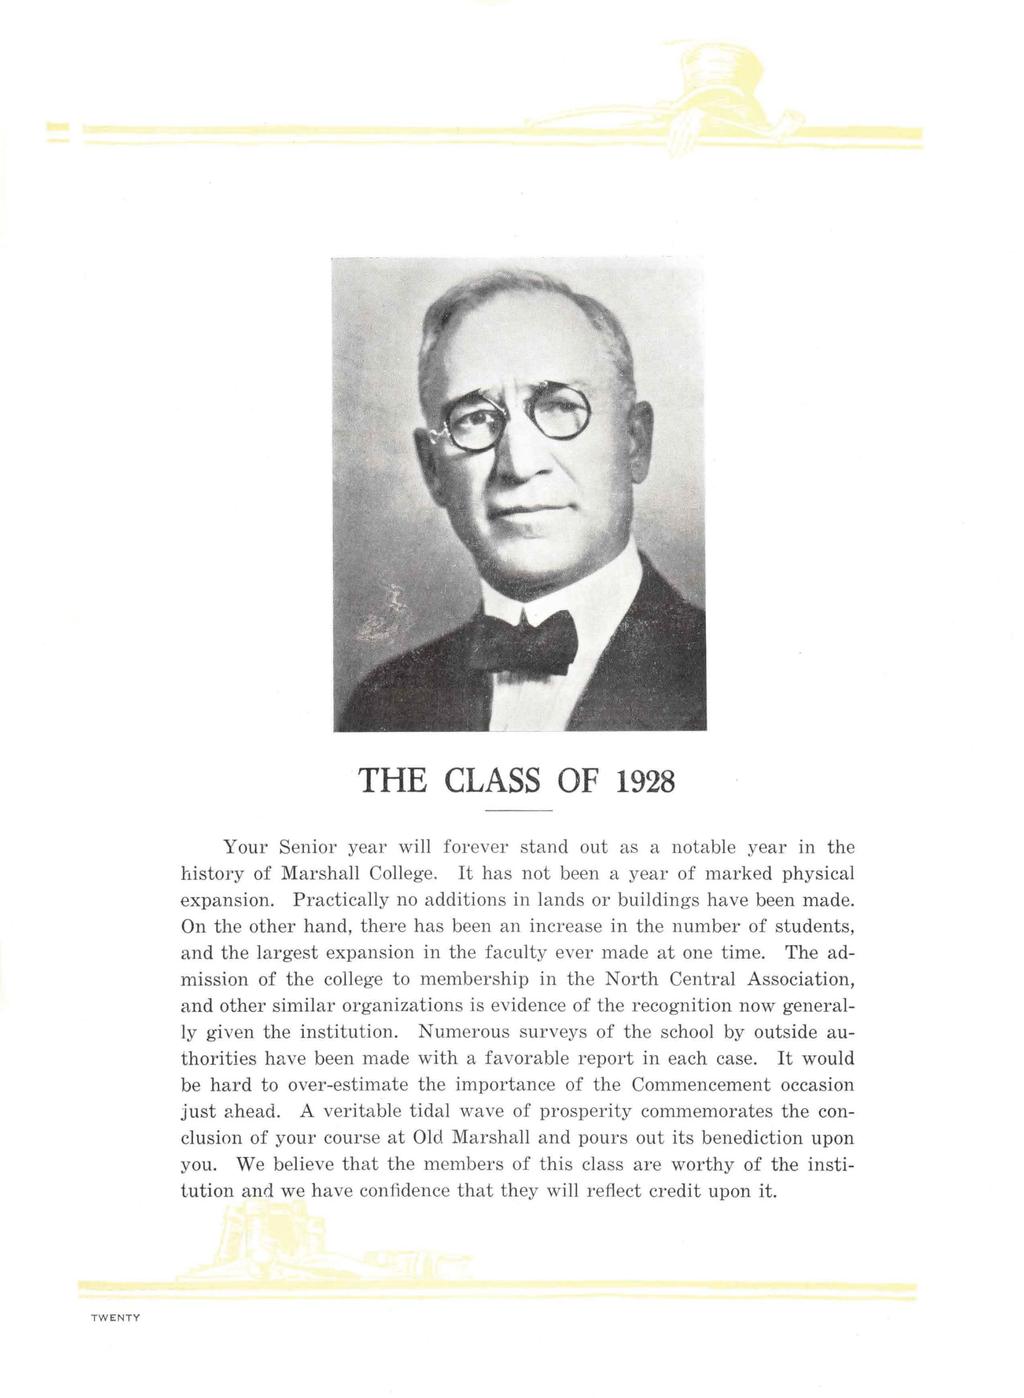 THE CLASS OF 1928 Your Senior year will forever stand out as a notable year in the history of Marshall College. It has not been a year of marked physical expansion.